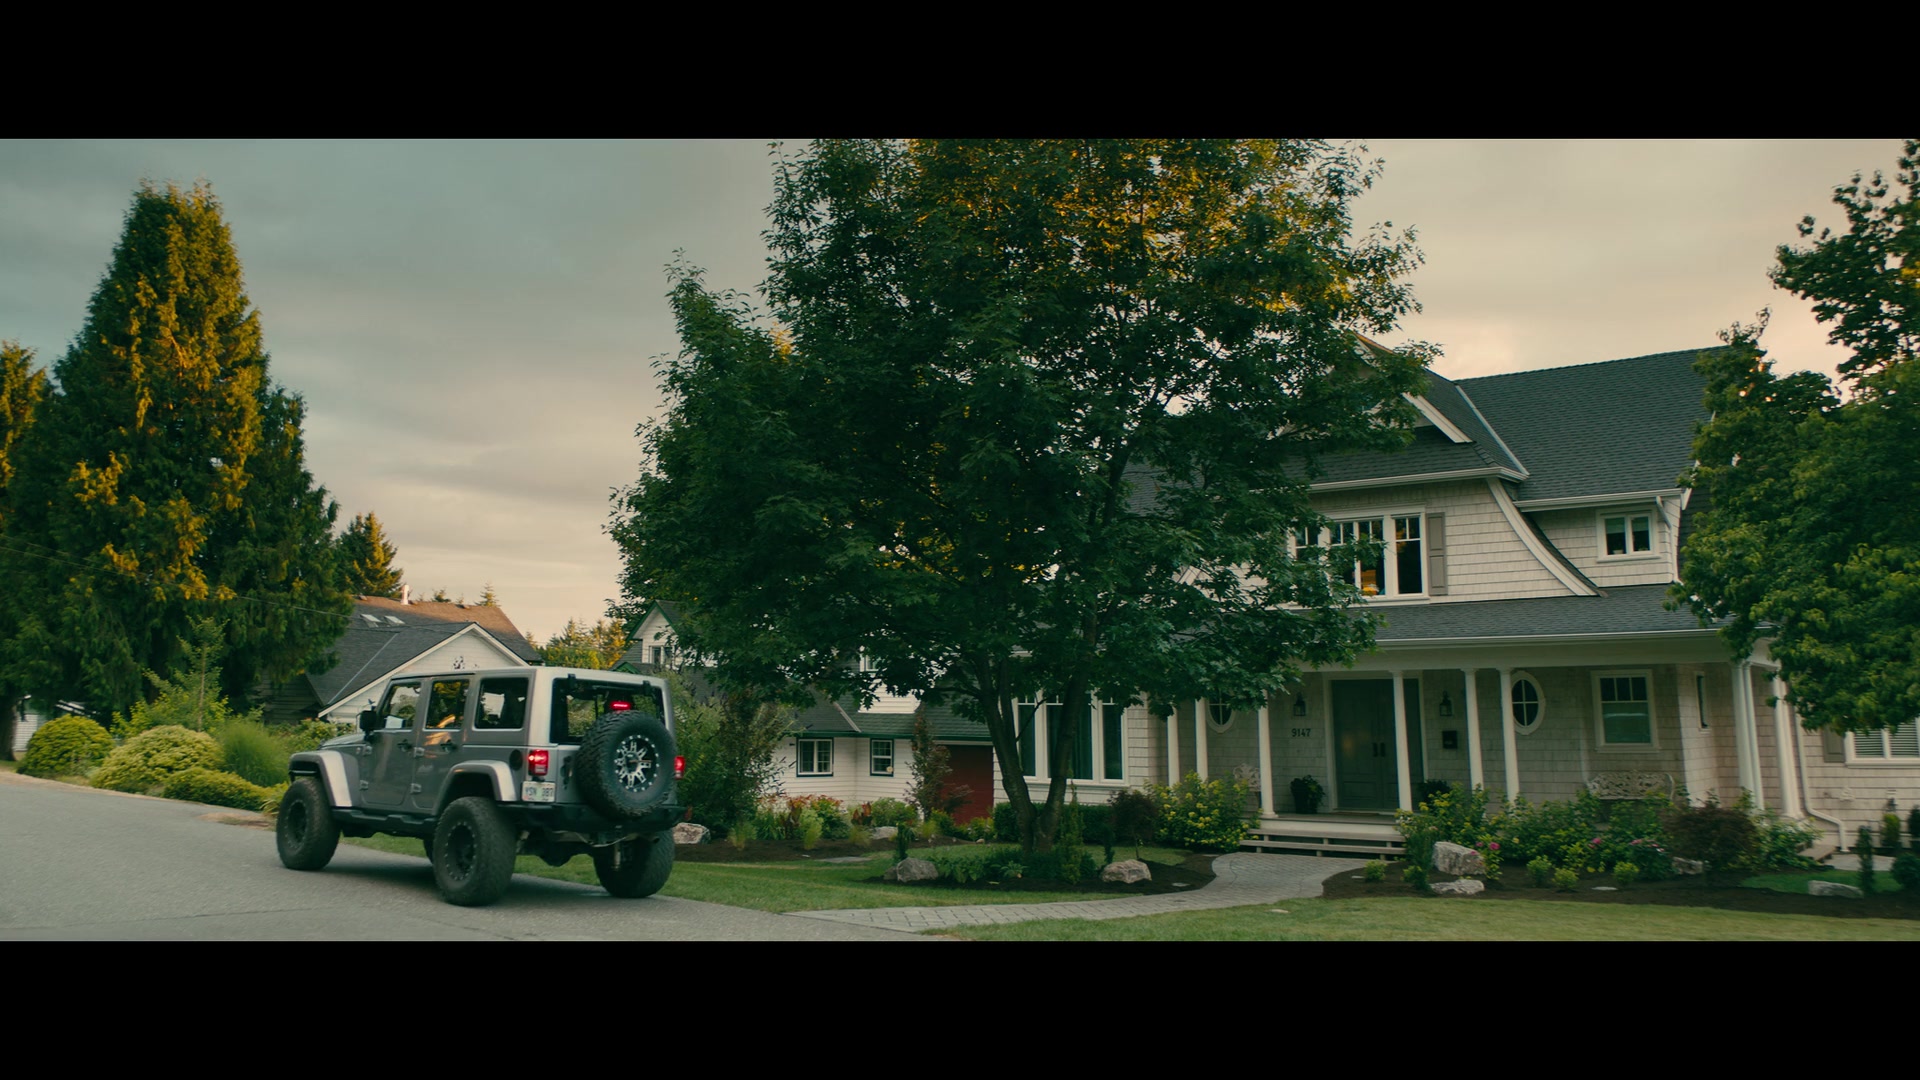 Jeep Wrangler Car Used by Noah Centineo in To All the Boys I’ve Loved Before (2018 ...1920 x 1080